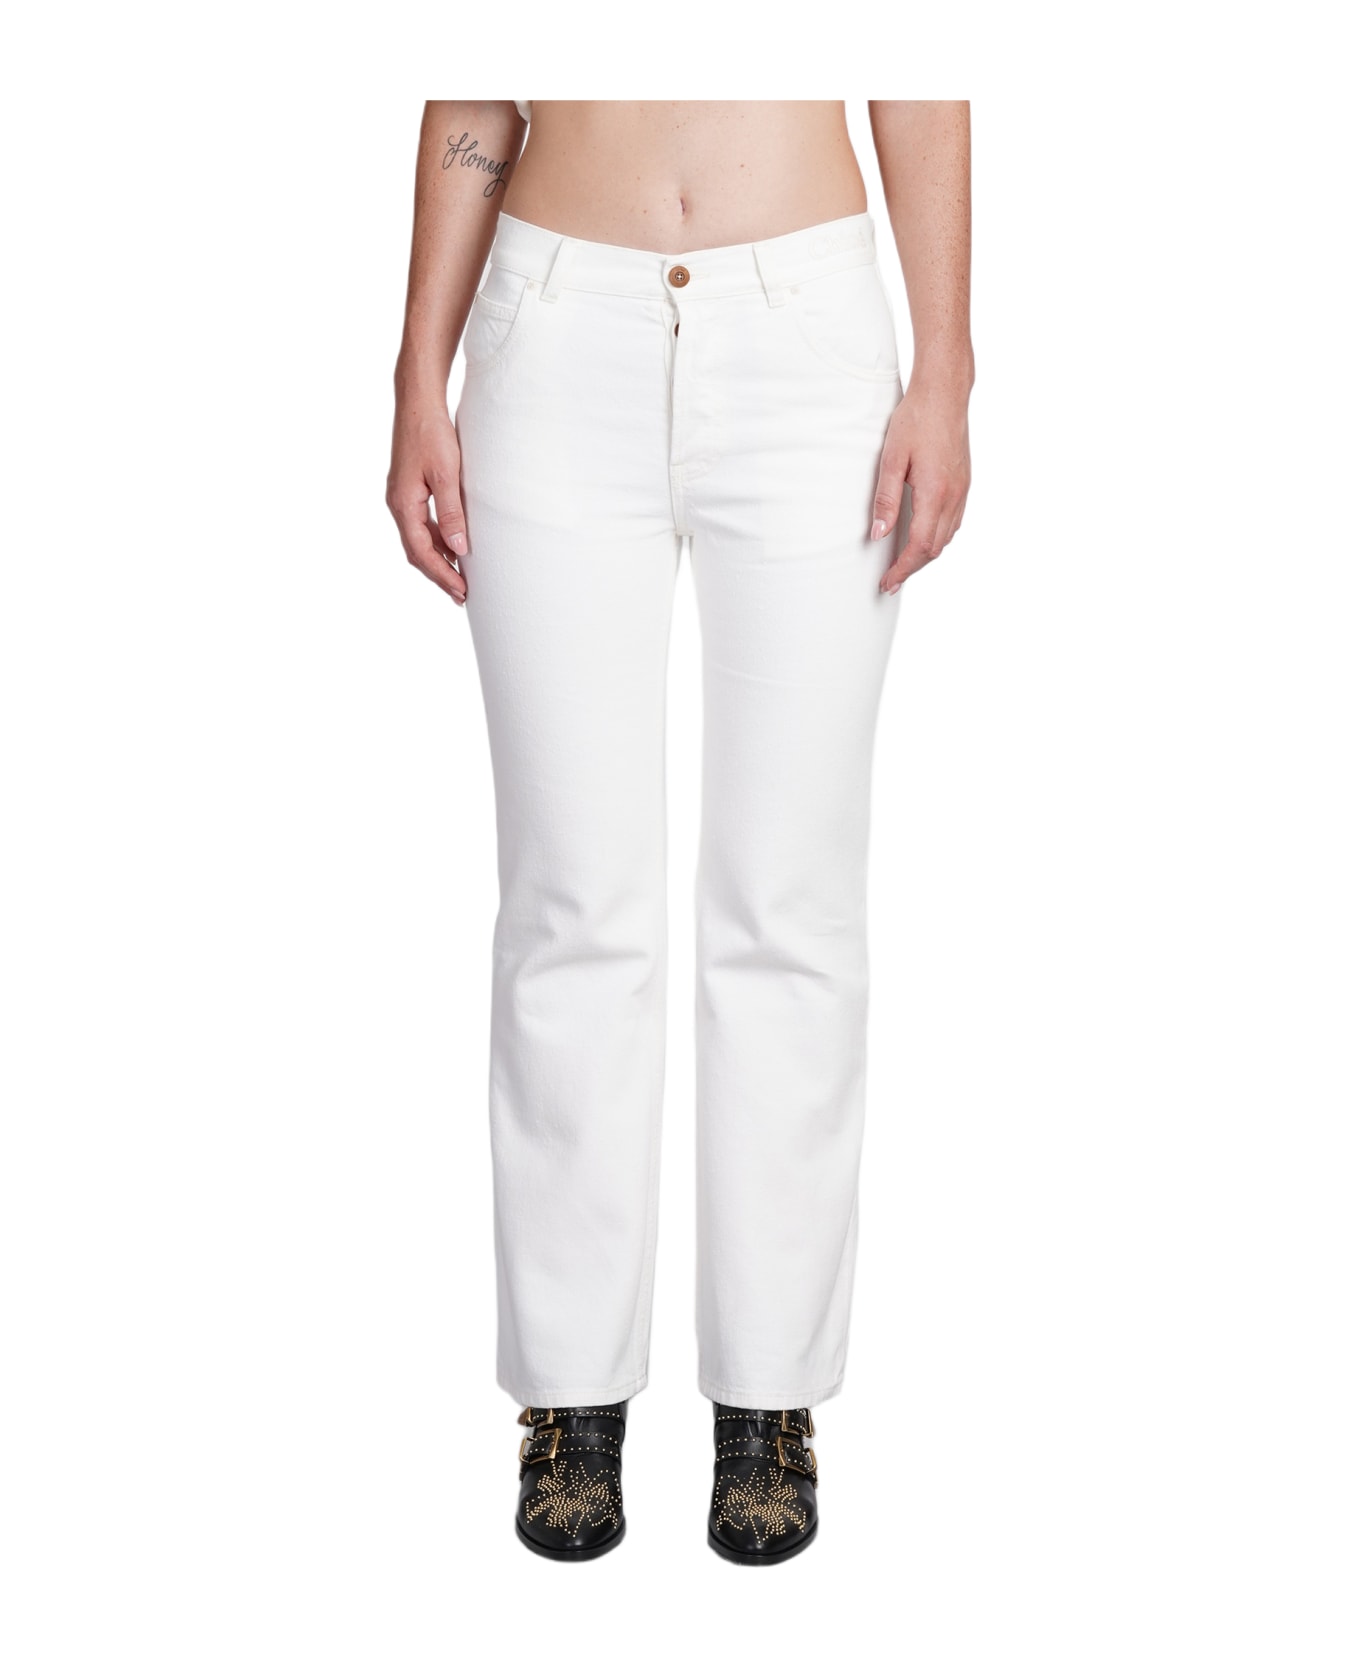 Chloé Jeans In White Cotton - white ボトムス